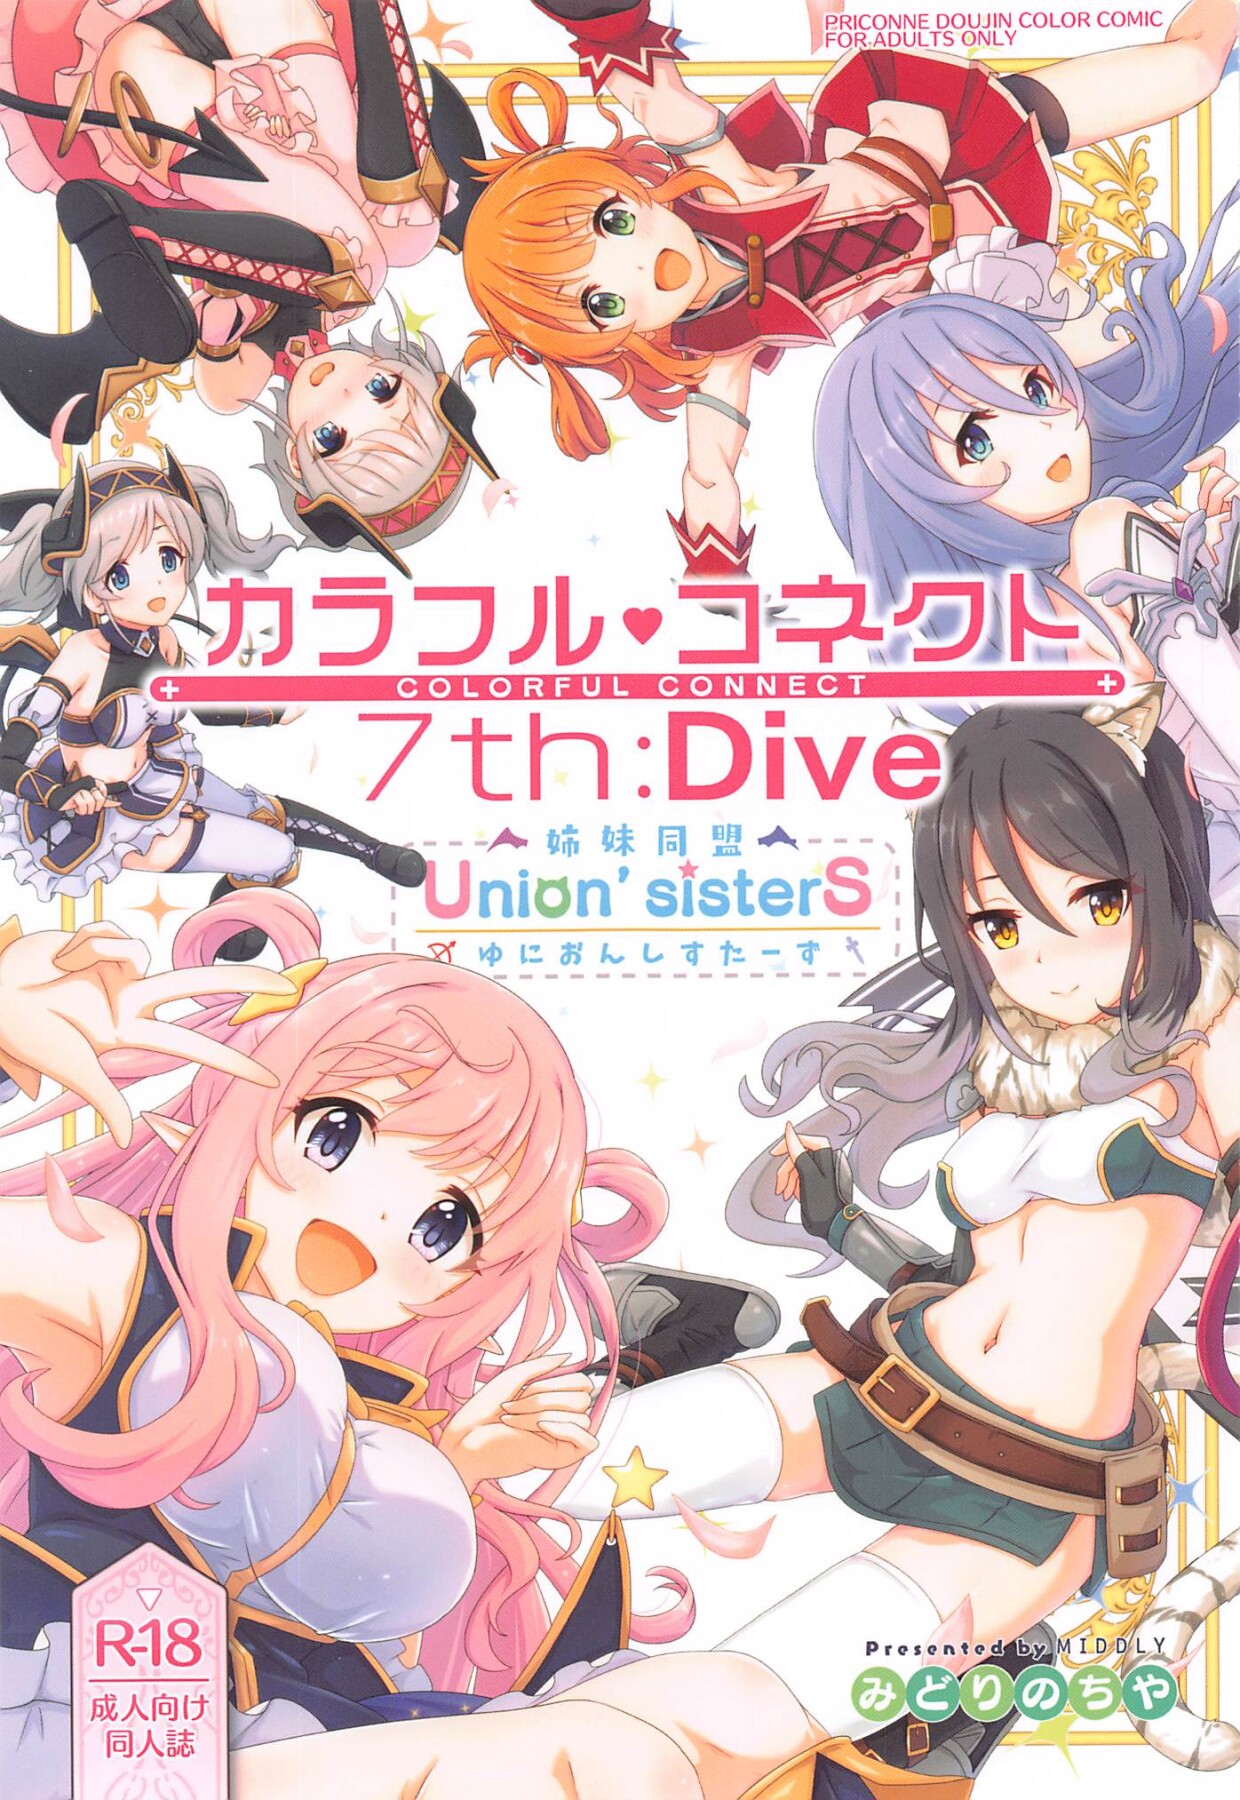 Hentai Manga Comic-Colorful Connect 7th:Dive - Union Sisters-Read-1